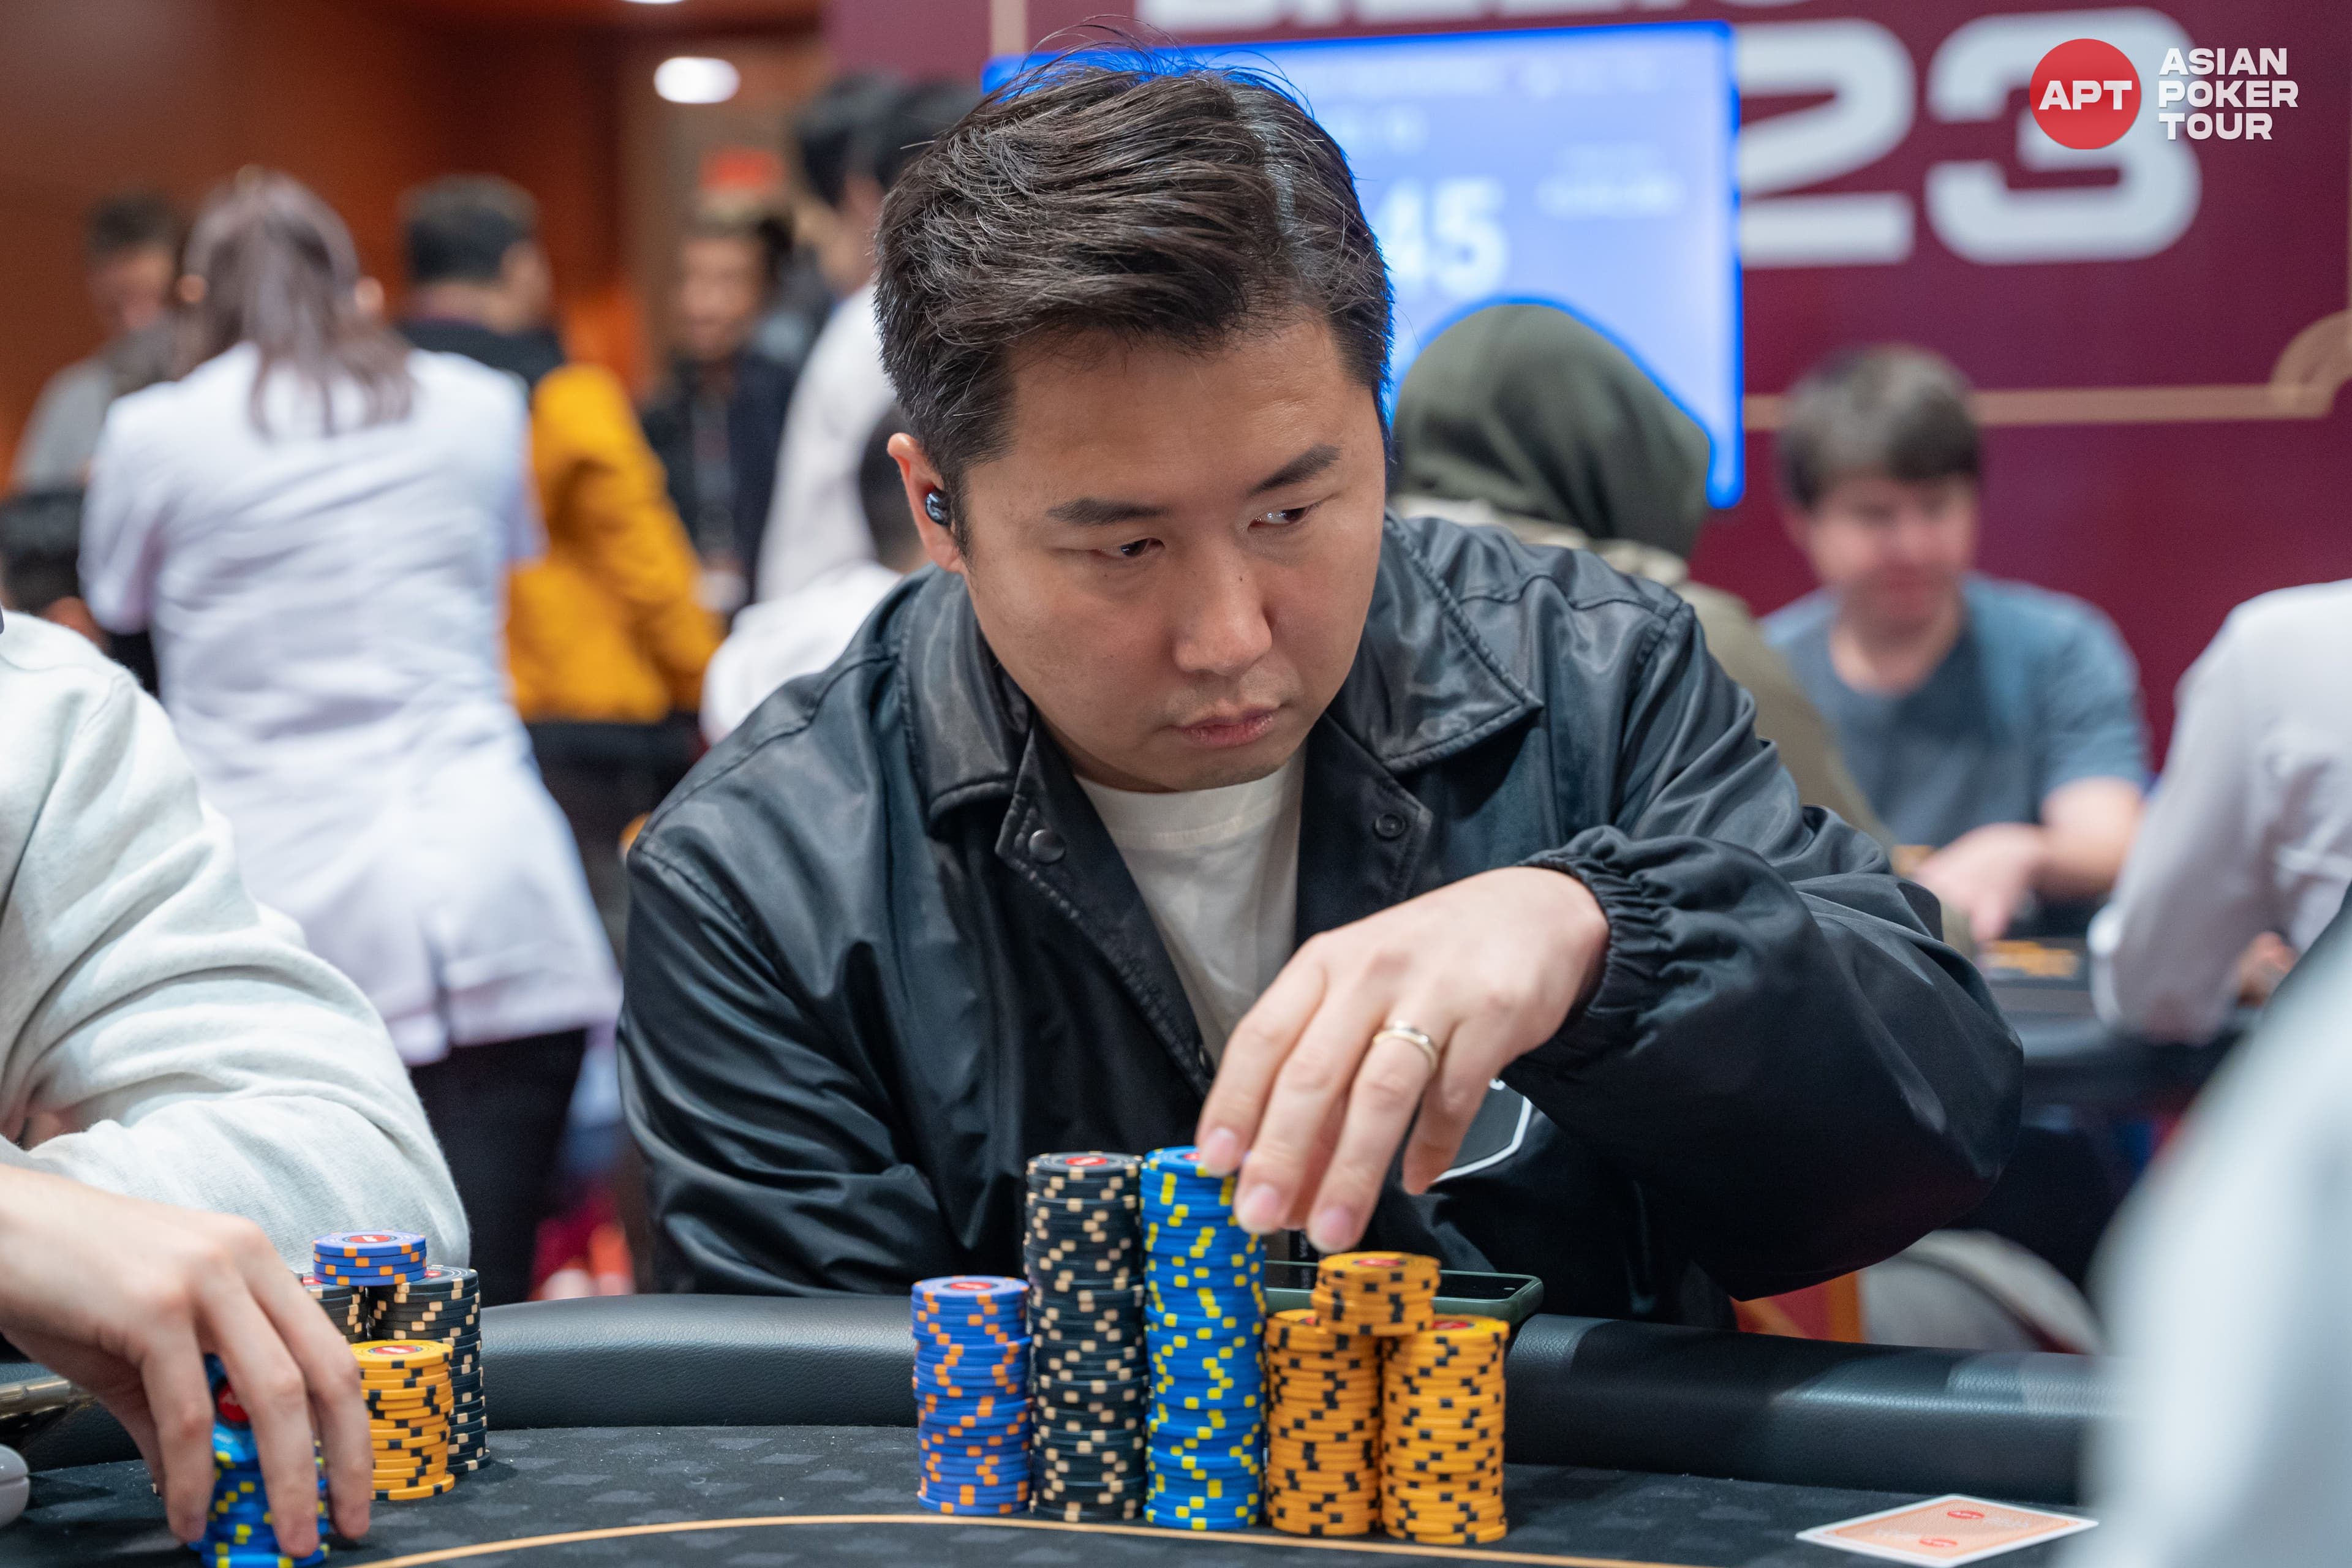 Main Event Closing in on Record; South Korea's Jun Young Park Tops Flight B